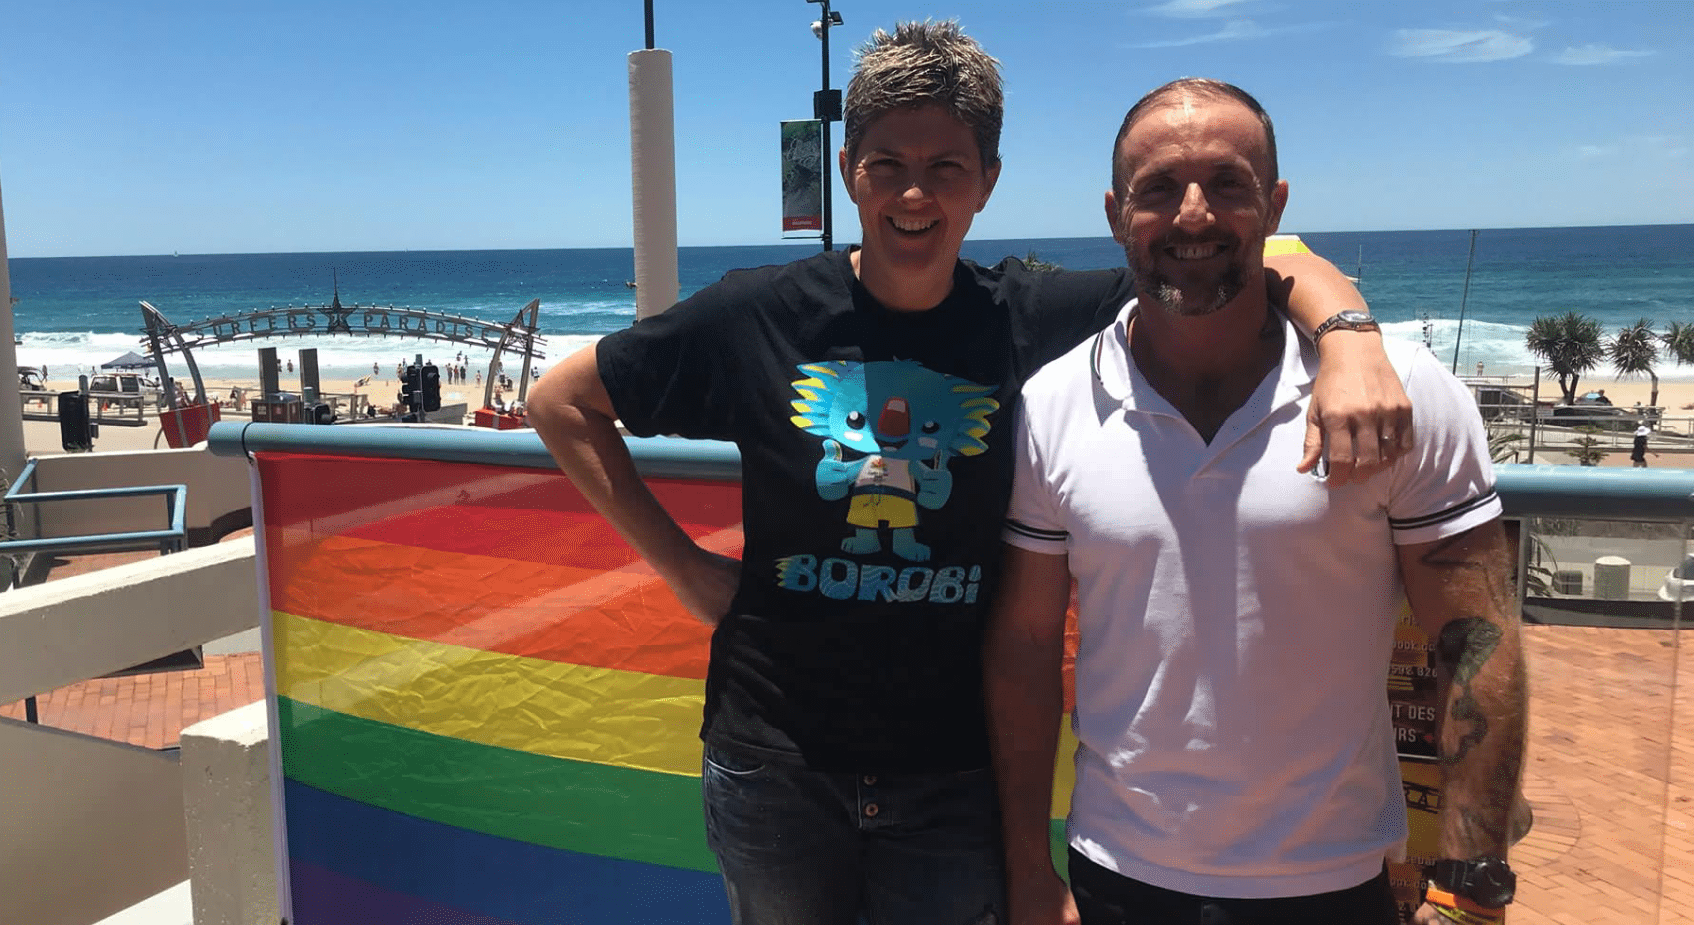 Australia’s first ever Pride House will open for the Commonwealth Games